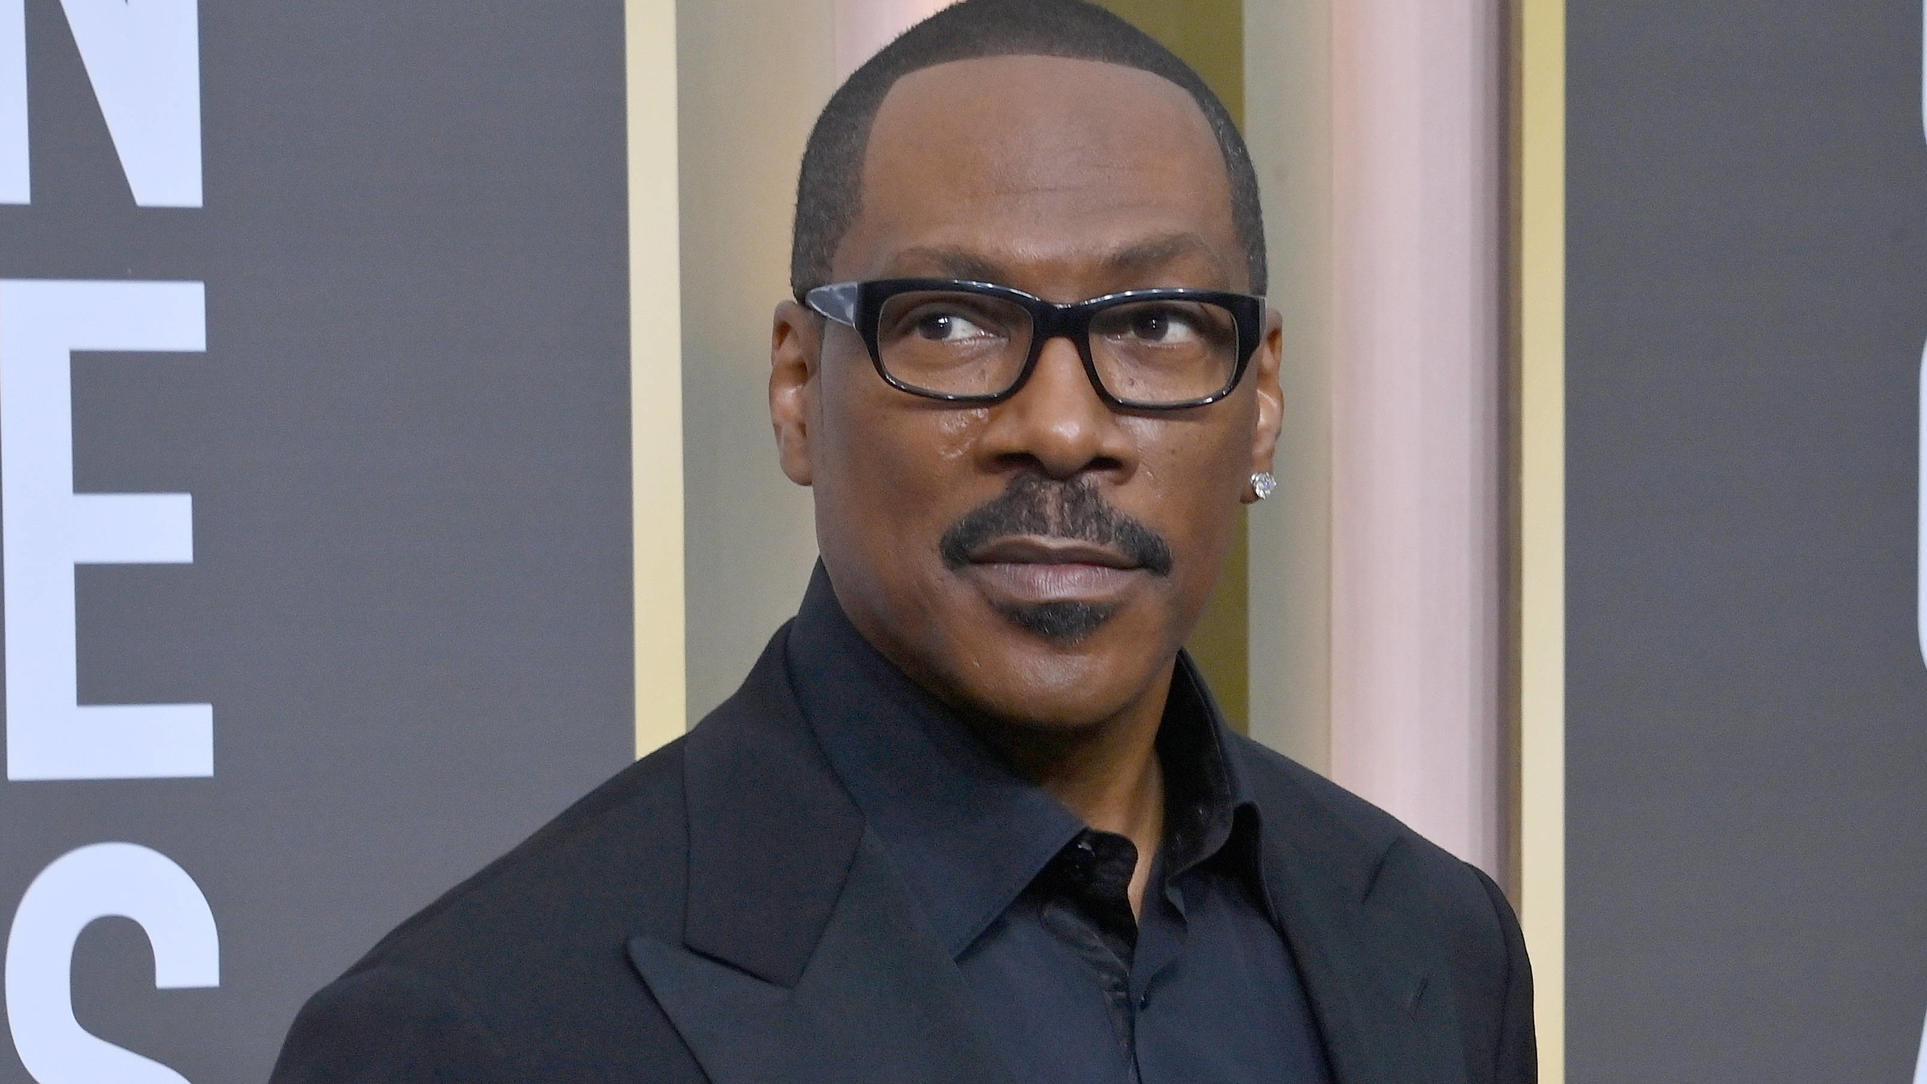 Eddie Murphy arrives for the 80th annual Golden Globe Awards at the Beverly Hilton in Beverly Hills, California on Tuesday, January 10, 2023. PUBLICATIONxINxGERxSUIxAUTxHUNxONLY LAP20230110649 JIMxRUYMEN